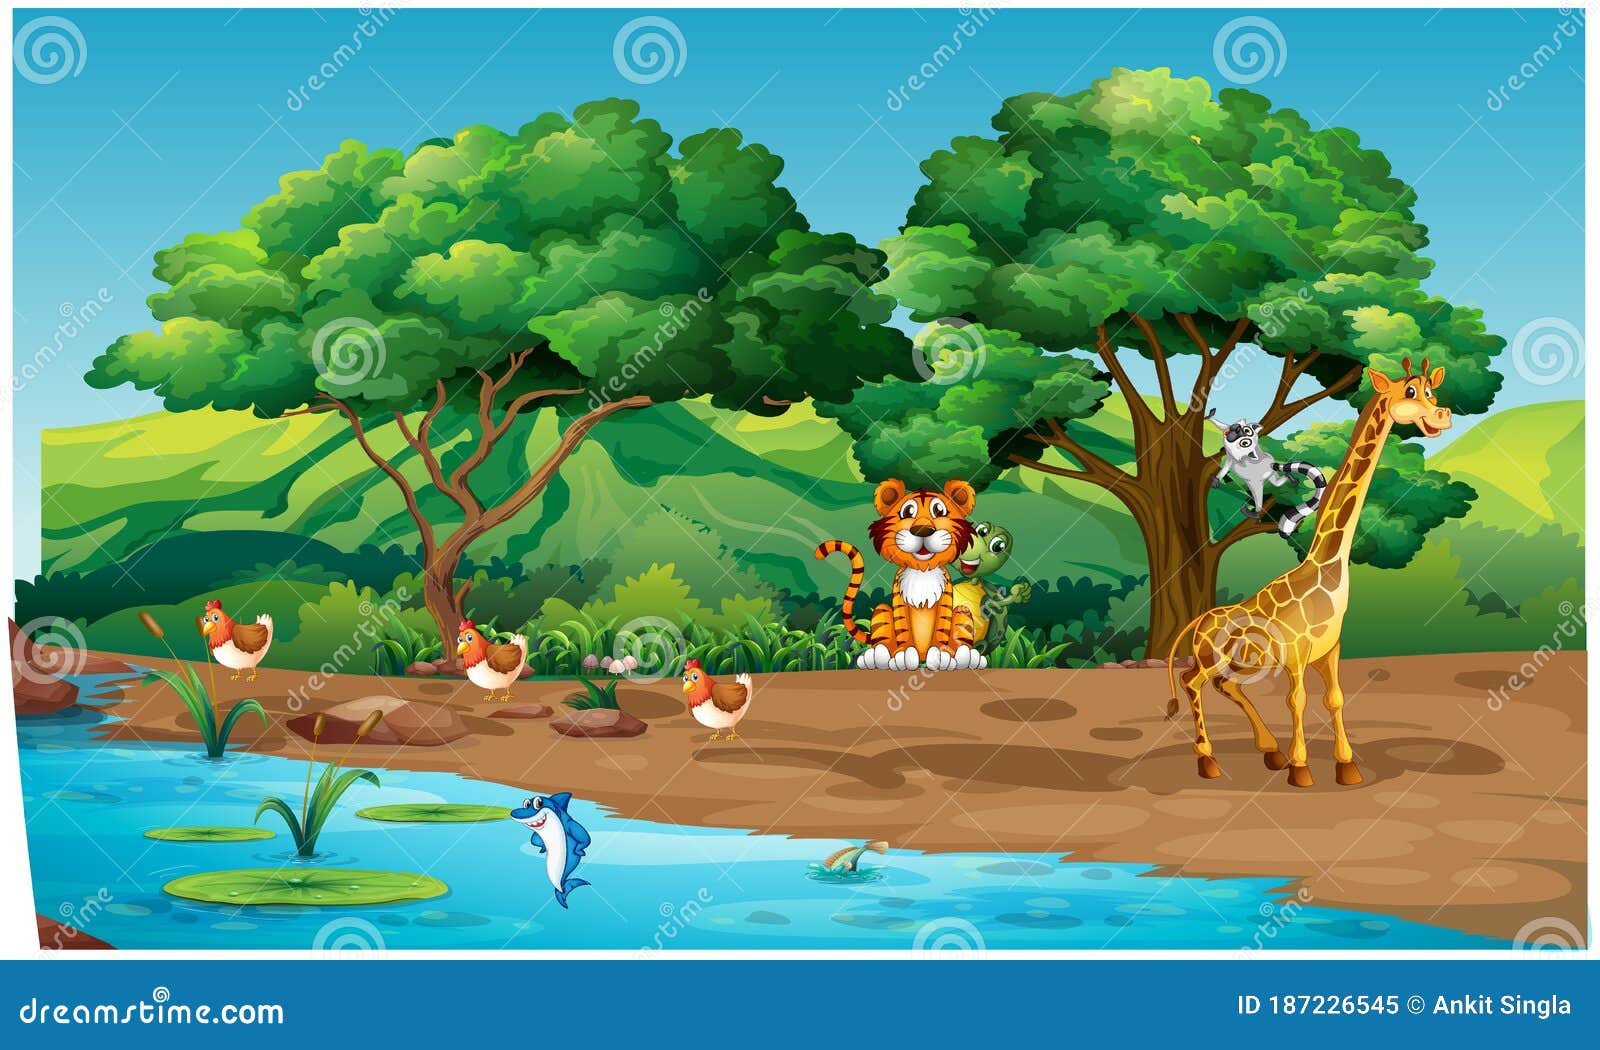 Animals are Playing on the River Bank in the Forest Stock Vector -  Illustration of environment, animals: 187226545